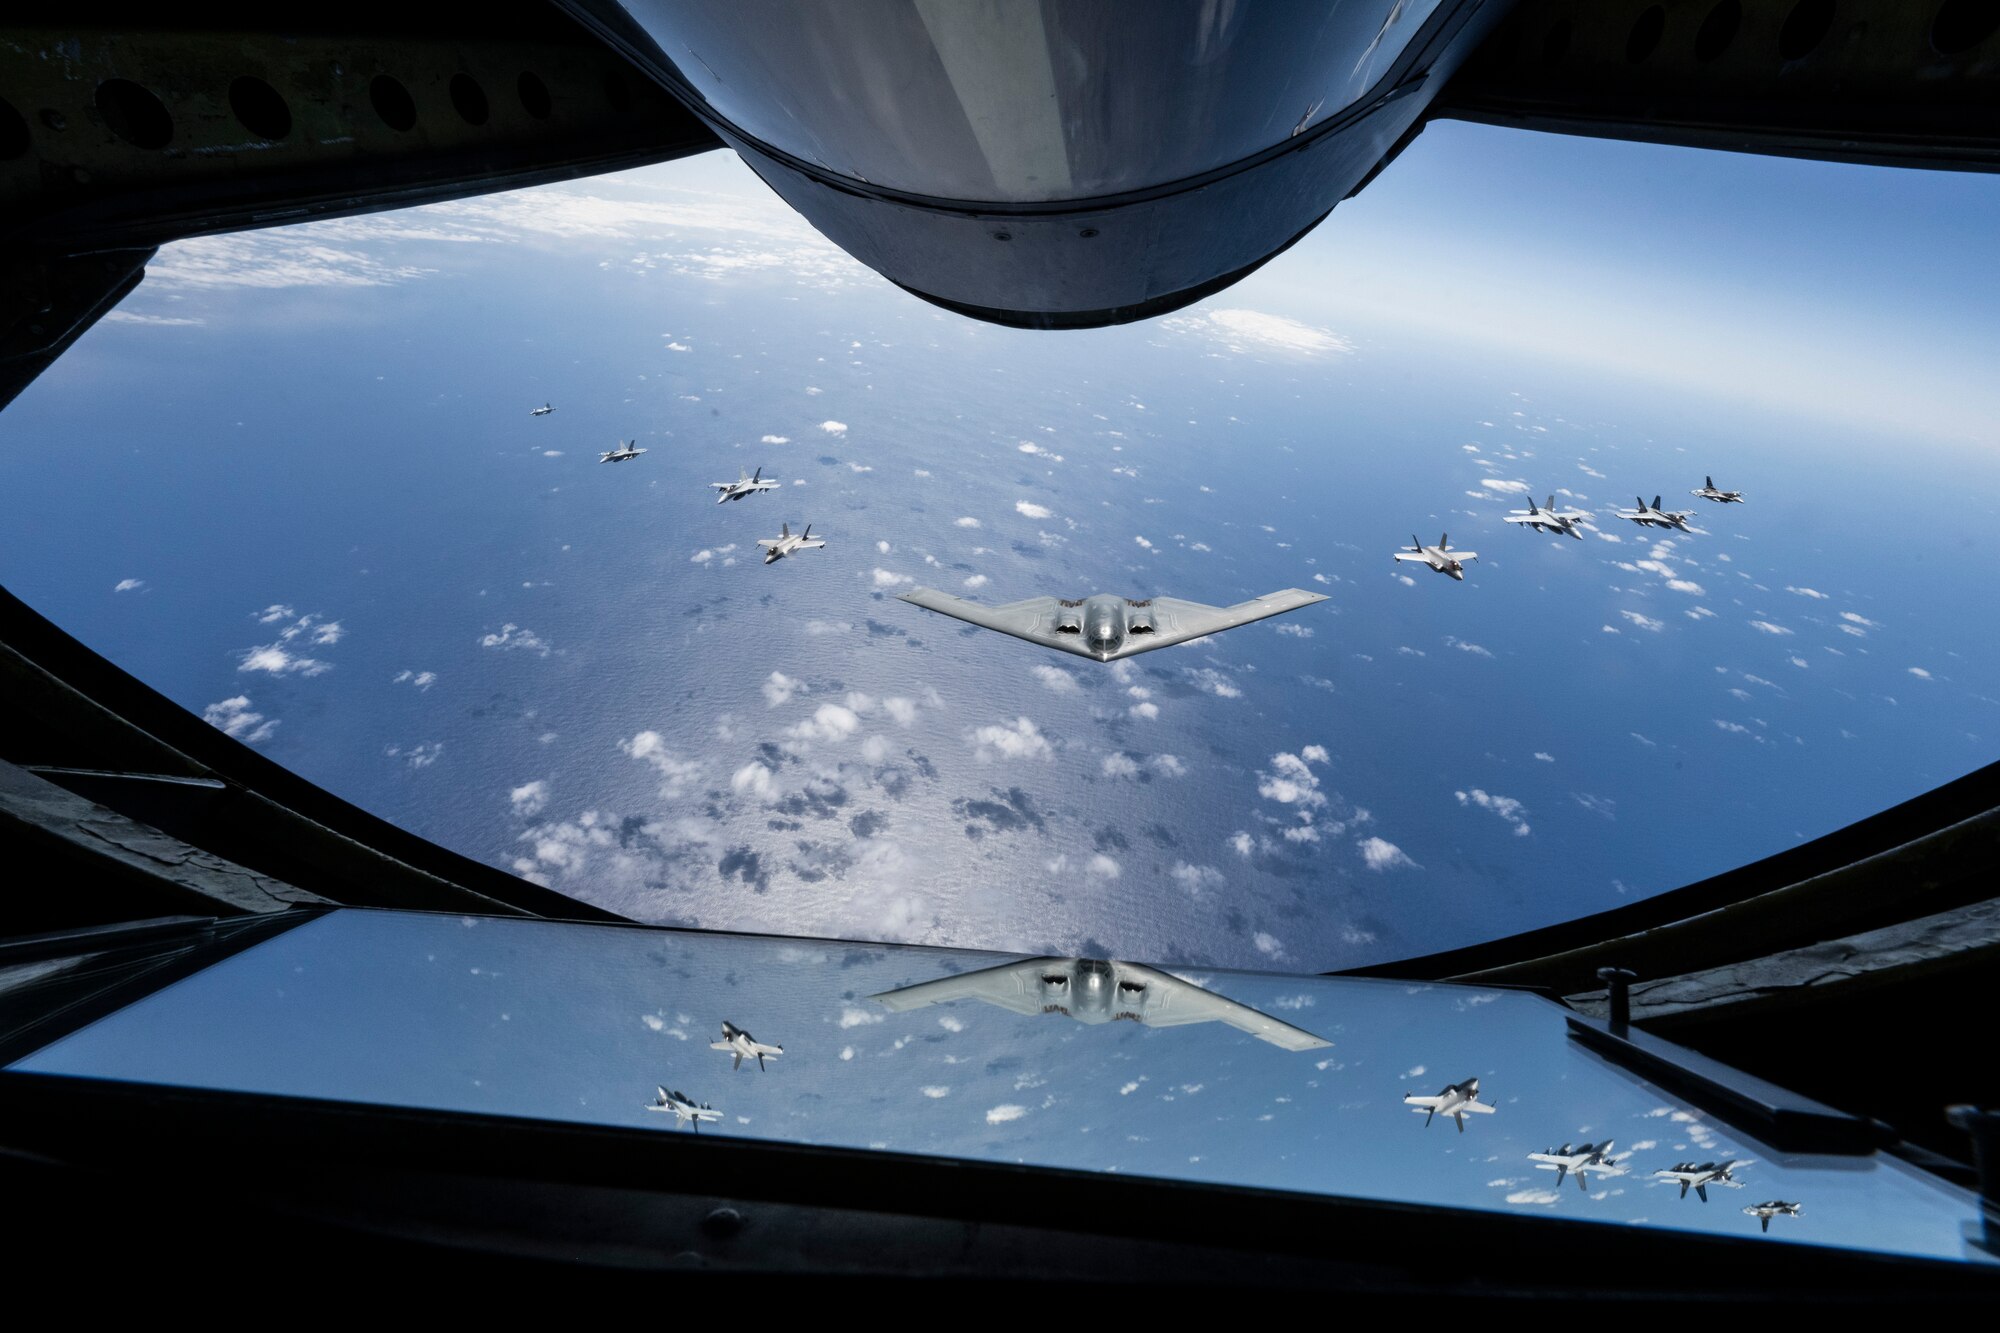 A U.S. Air force B-2 Spirit from Whiteman Air Force Base, Missouri, flies in formation with two Royal Australian Air Force F-35A Lightning IIs, two RAAF F/A-18F Super Hornets, two RAAF EA-18 Growlers, and two U.S. Air Force F-16C Aggressors from Eielson Air Force Base, Alaska during a training mission in the Indo-Pacific region, March 23, 2022. The mission provided the opportunity to train and work with our allies and partners in joint and coalition operations and exercises. (U.S. Air Force photo by Tech. Sgt. Hailey Haux)